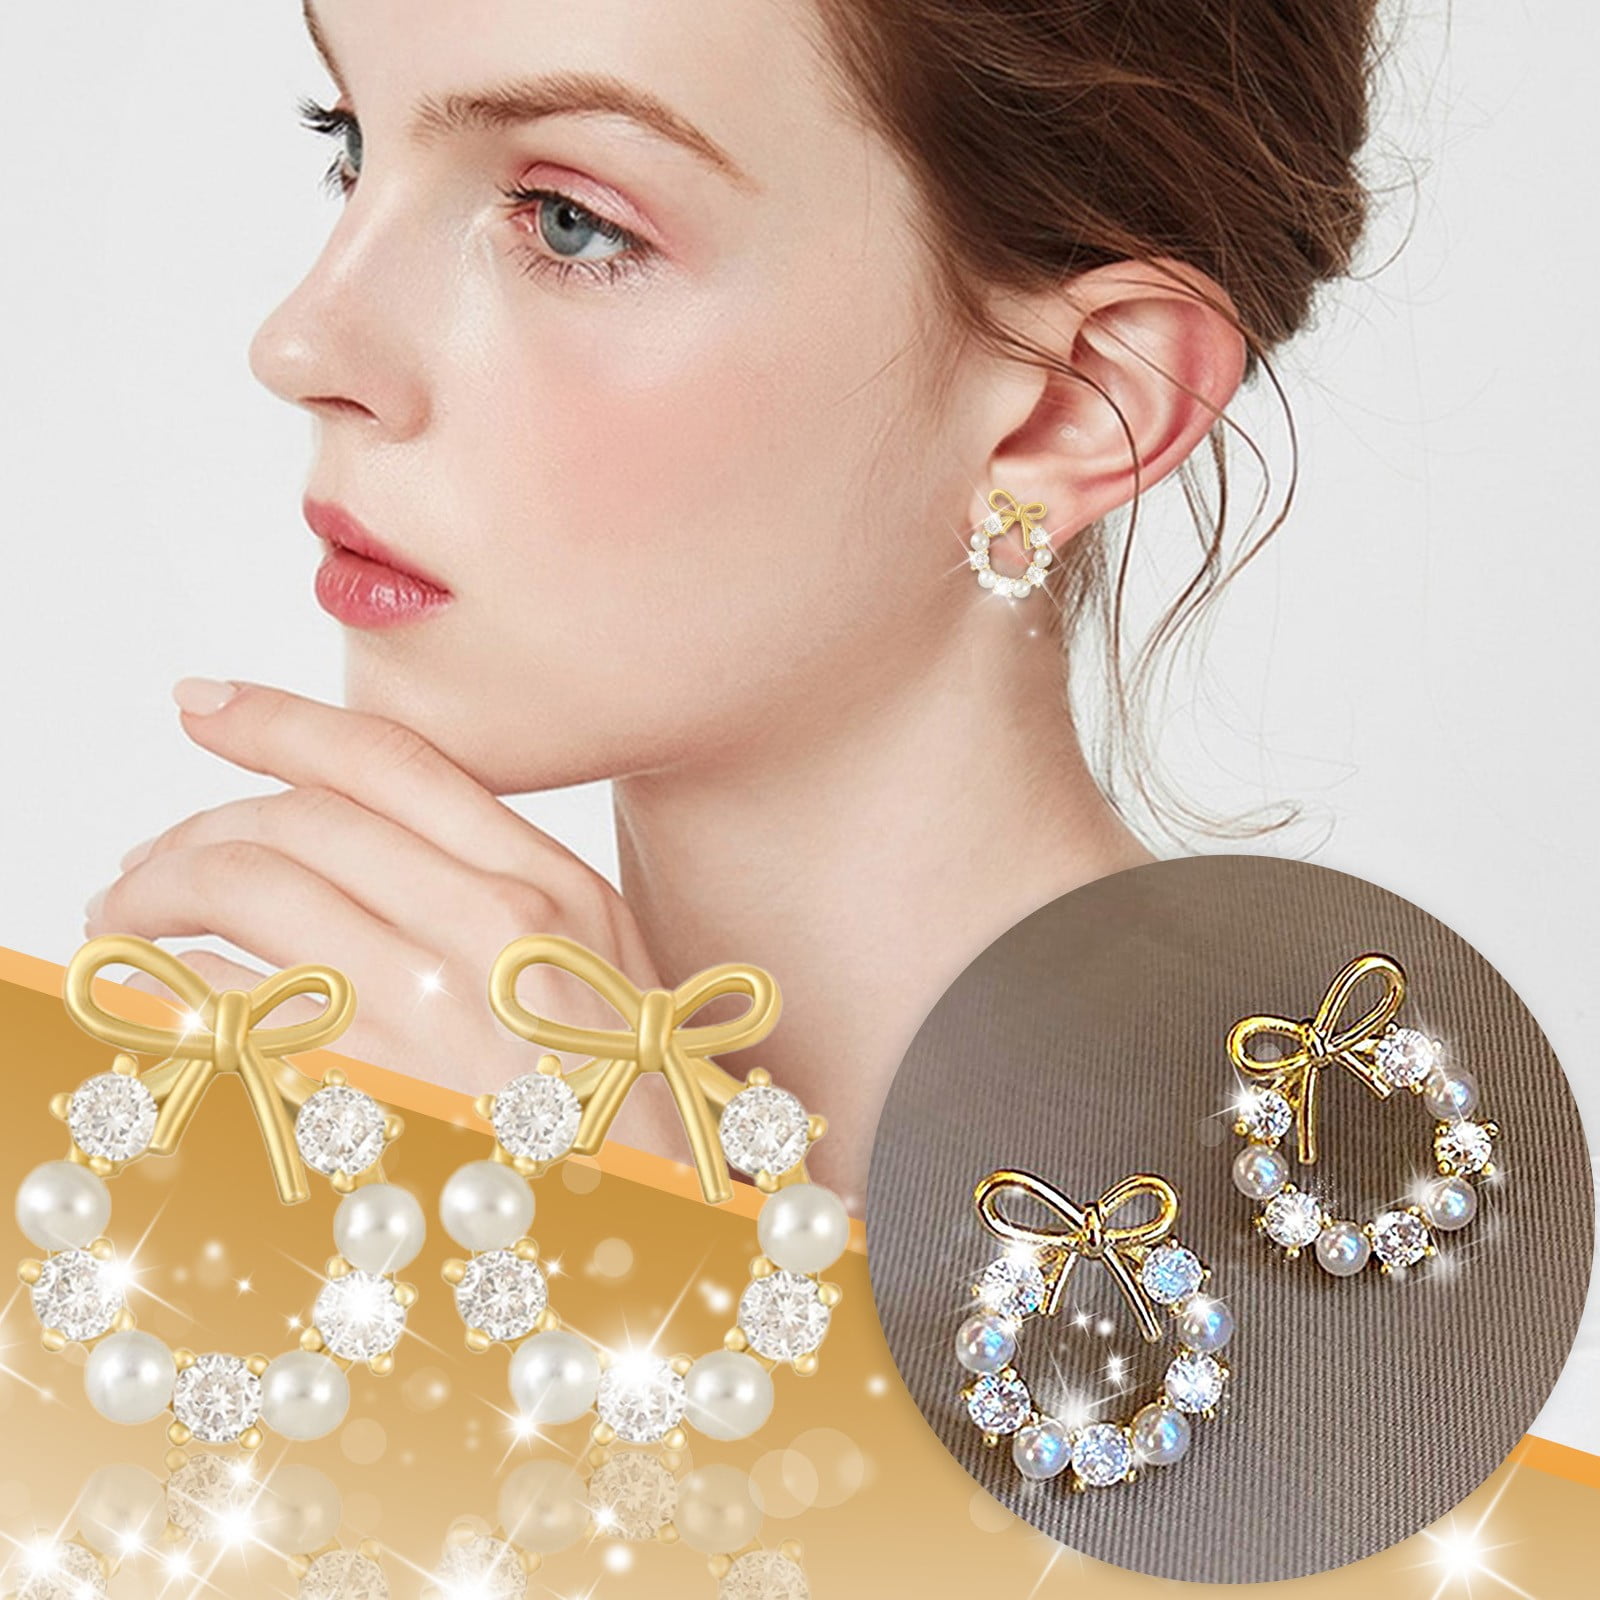 Sweet Cherry Dangle Earrings: Fashionable Summer Jewelry For Girls From  Xrh2, $23.75 | DHgate.Com